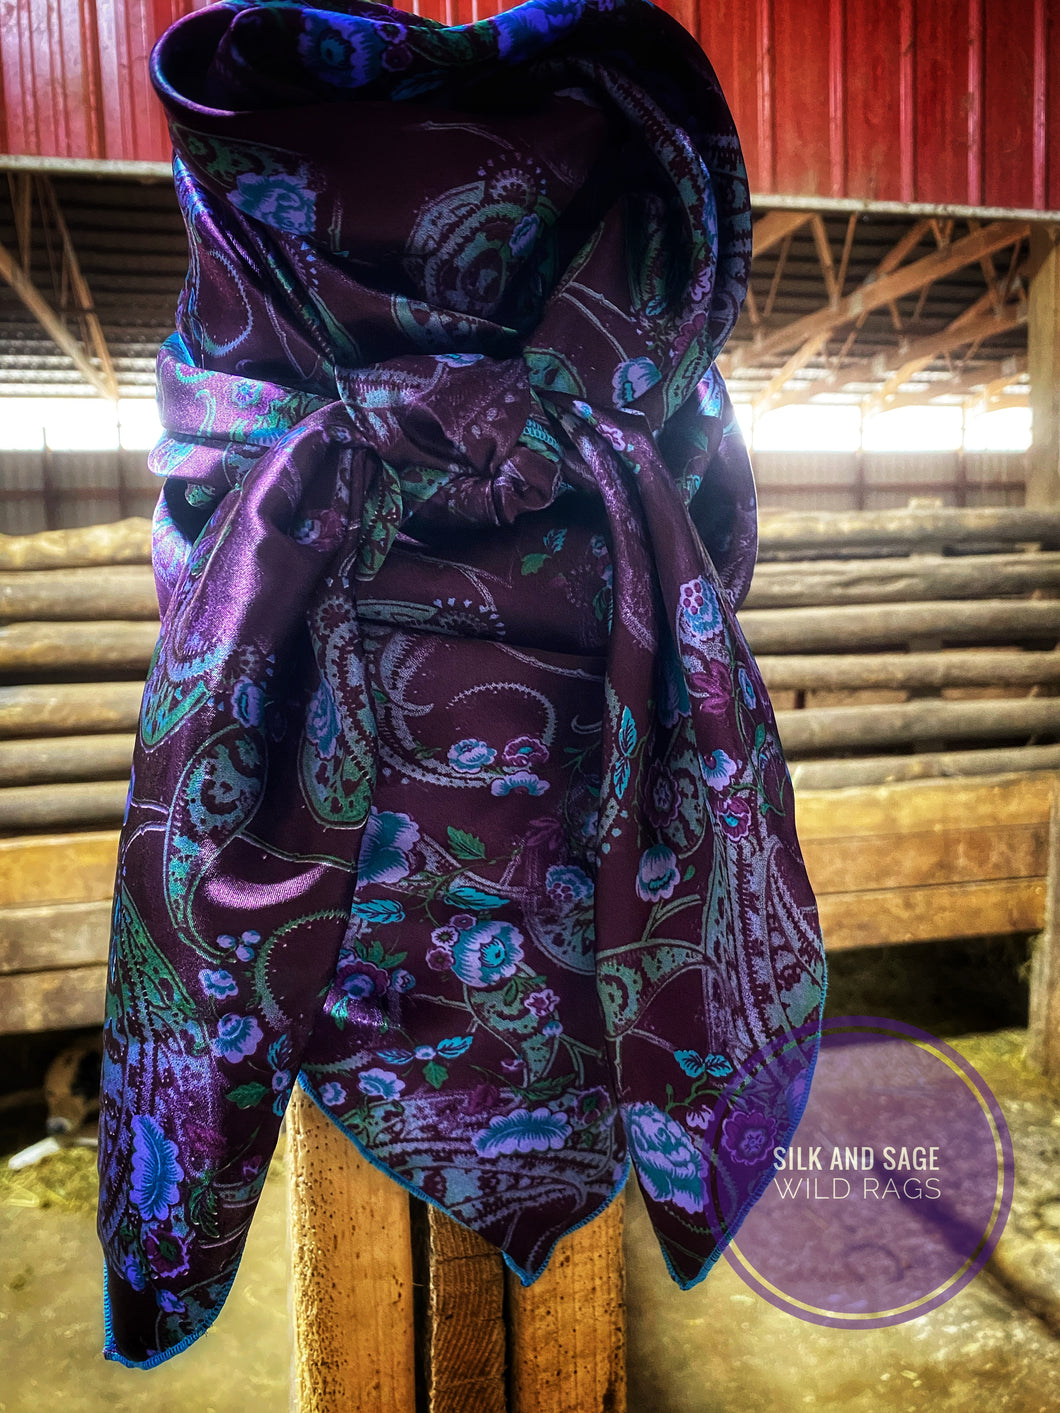 BEAUTIFUL floral paisley print. Vibrant purple, teal, turquoise and blue tone silky charmeuse.